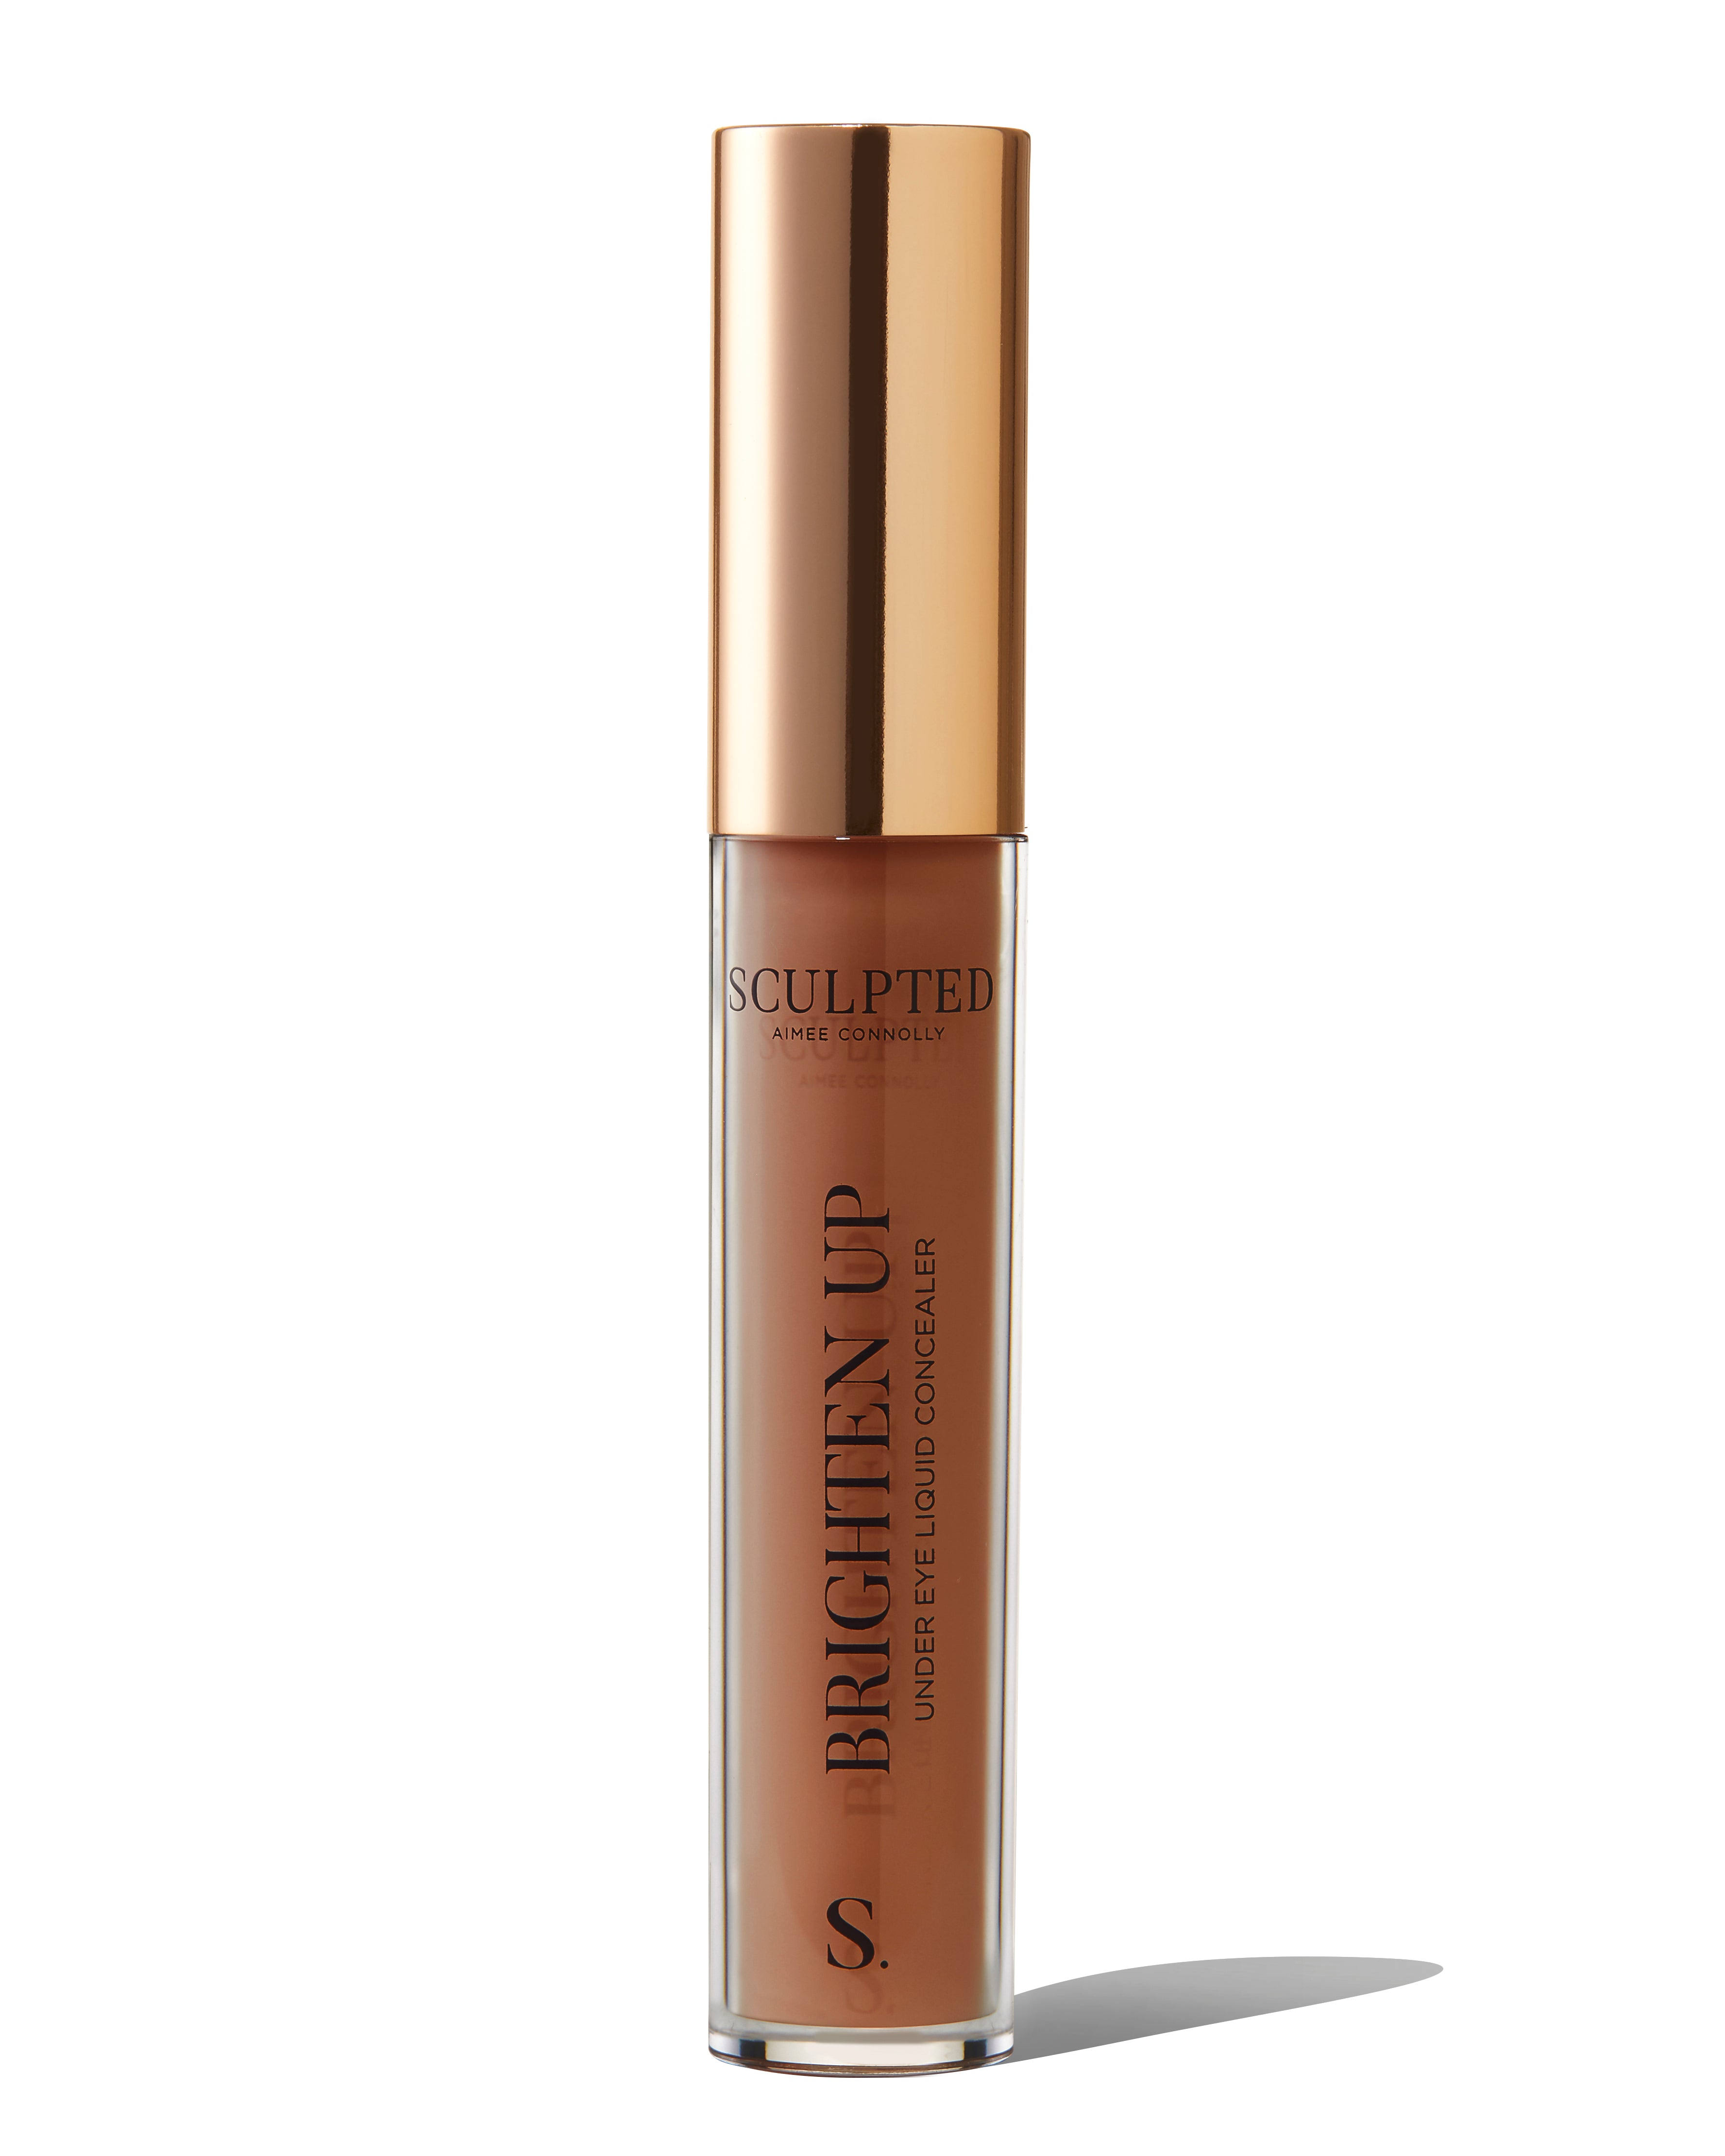 Sculpted by Aimee Connolly Brighten Up ConcealerBeige - A Light Warm Toned Concealer which Is Great for Those with Light to Medium Skin